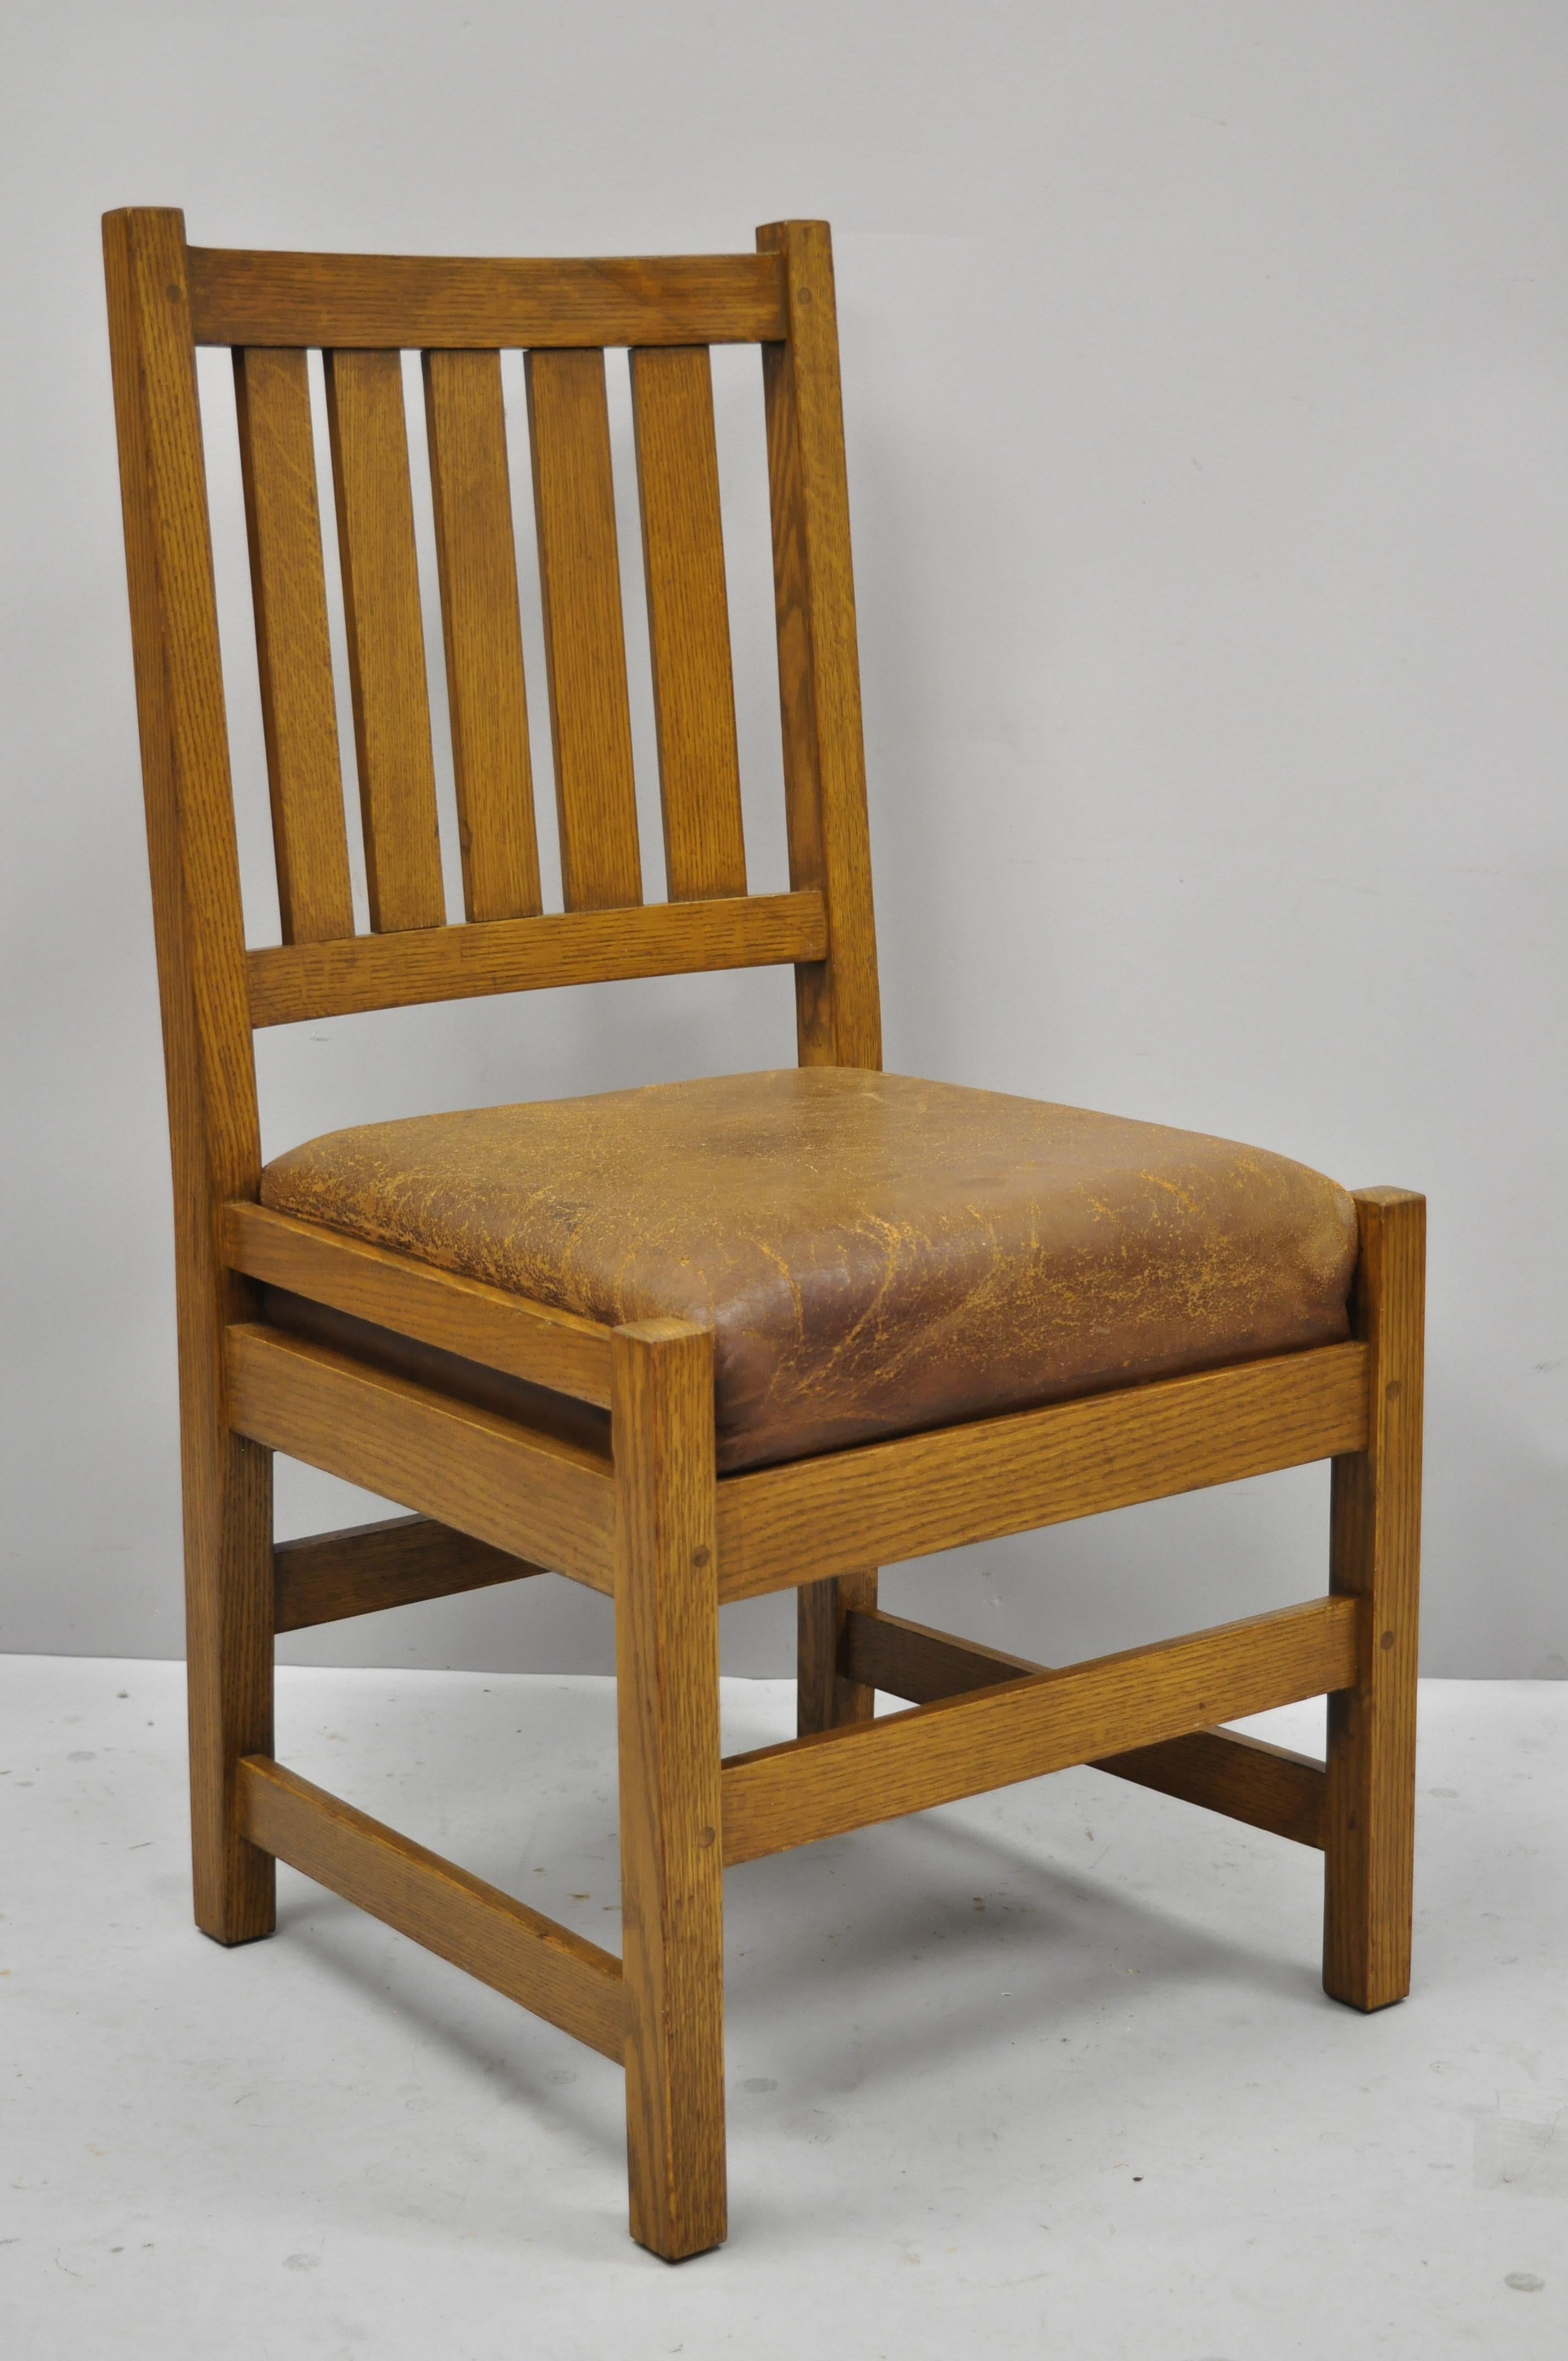 Set of 4 antique mission oak Arts & Crafts Stickley style dining chairs with brown leather seats. Item features slat backs, stretcher base, drop in brown leather seats, solid wood construction, beautiful wood grain, very nice vintage antique item,